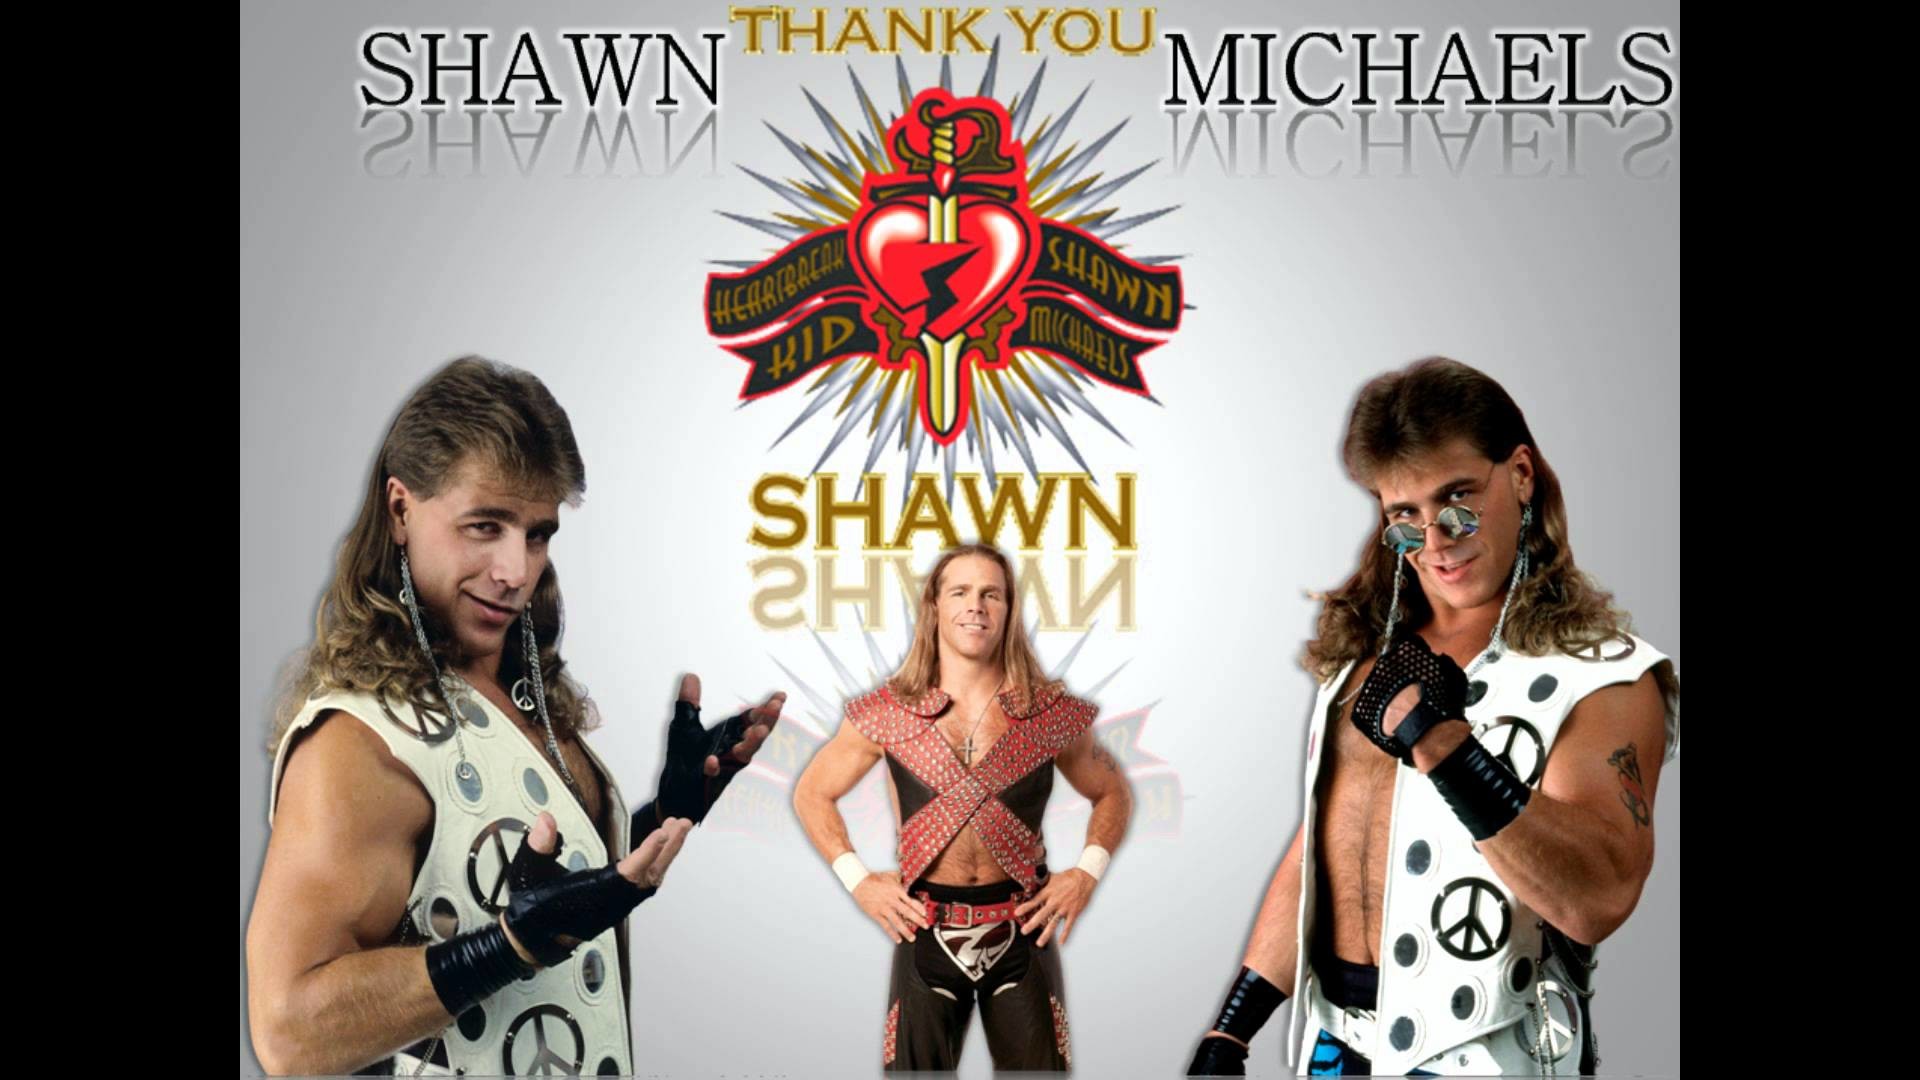 1920x1080 WWE Shawn Michaels LAST Theme Song-"Sexy Boy" [Wallpaper + Download Link]